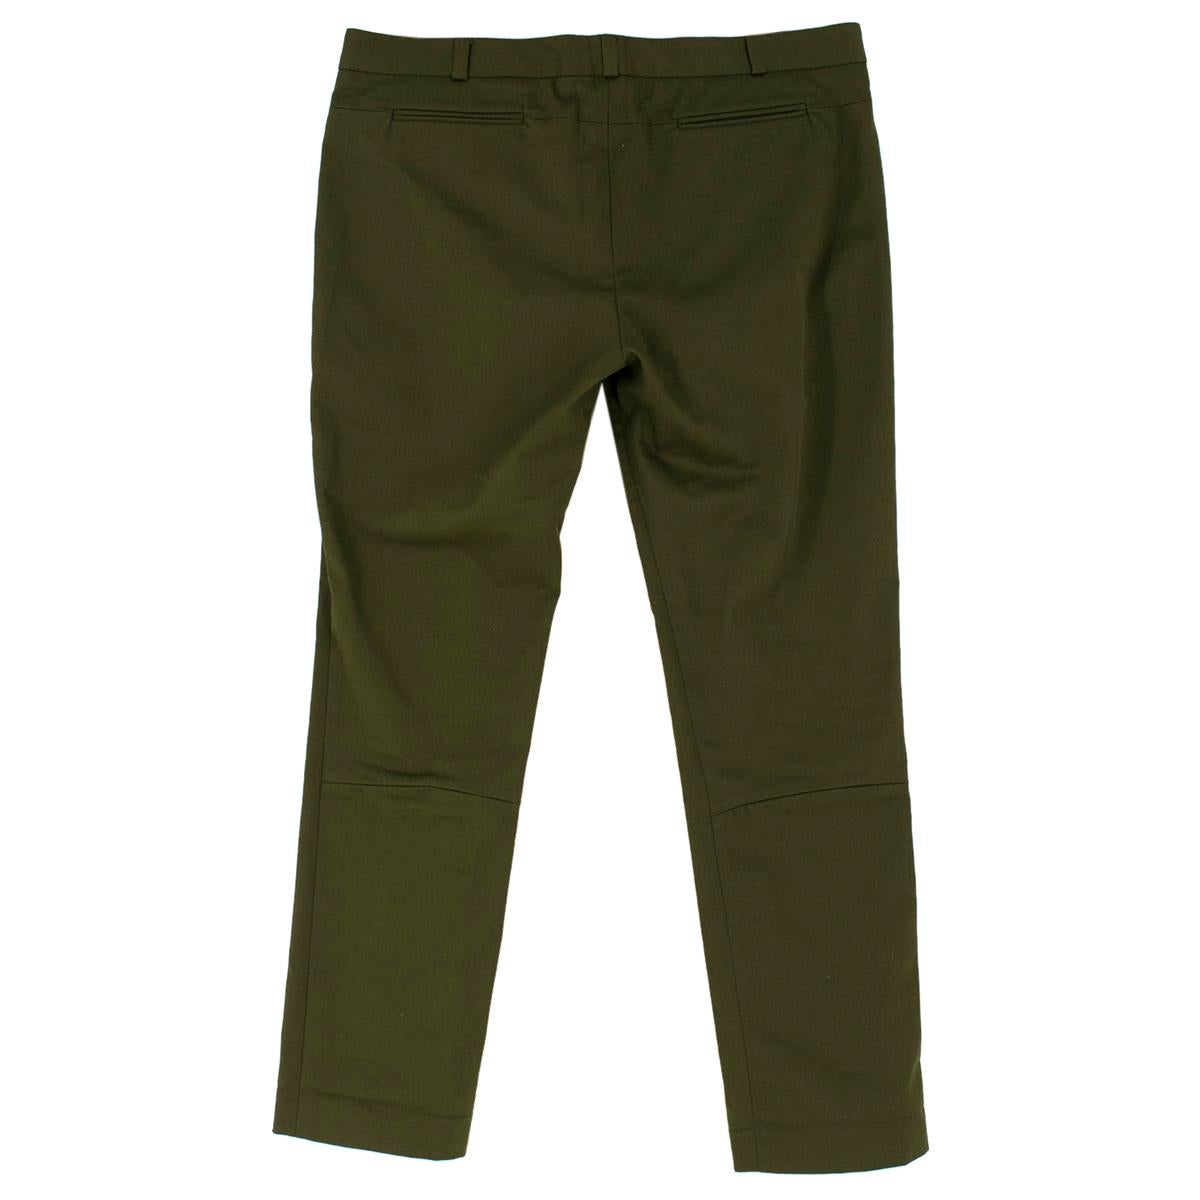 Victoria Beckham Cotton Green Slim fit Trousers

- Green cotton trousers
- Crop length
- Slim fit 
- Unlined
- Hidden zip, button and hook fastening 
- Belt hoops
- Two front and back slip pockets 
- Stitched middle front line

Please note, these